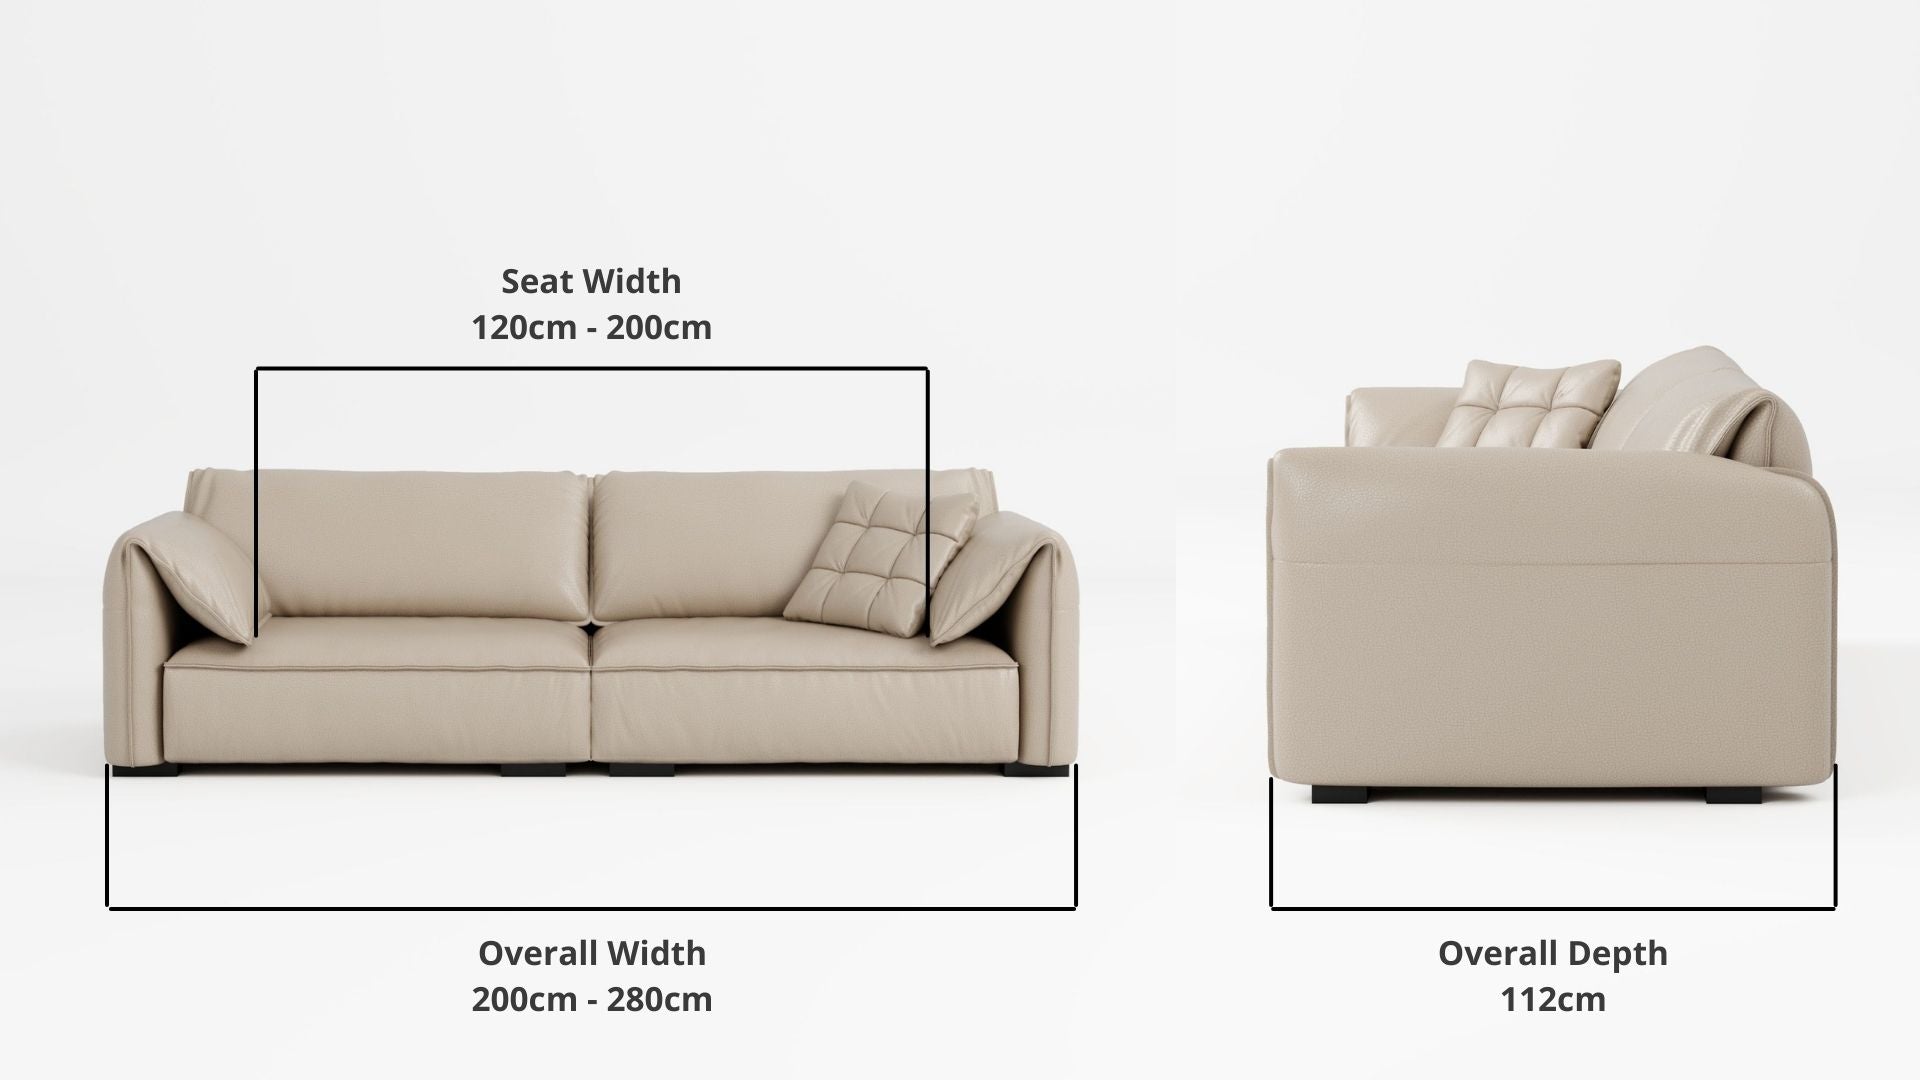 Details the key dimensions in terms of overall width, overall depth and seat width for Comfy Full Leather Sofa